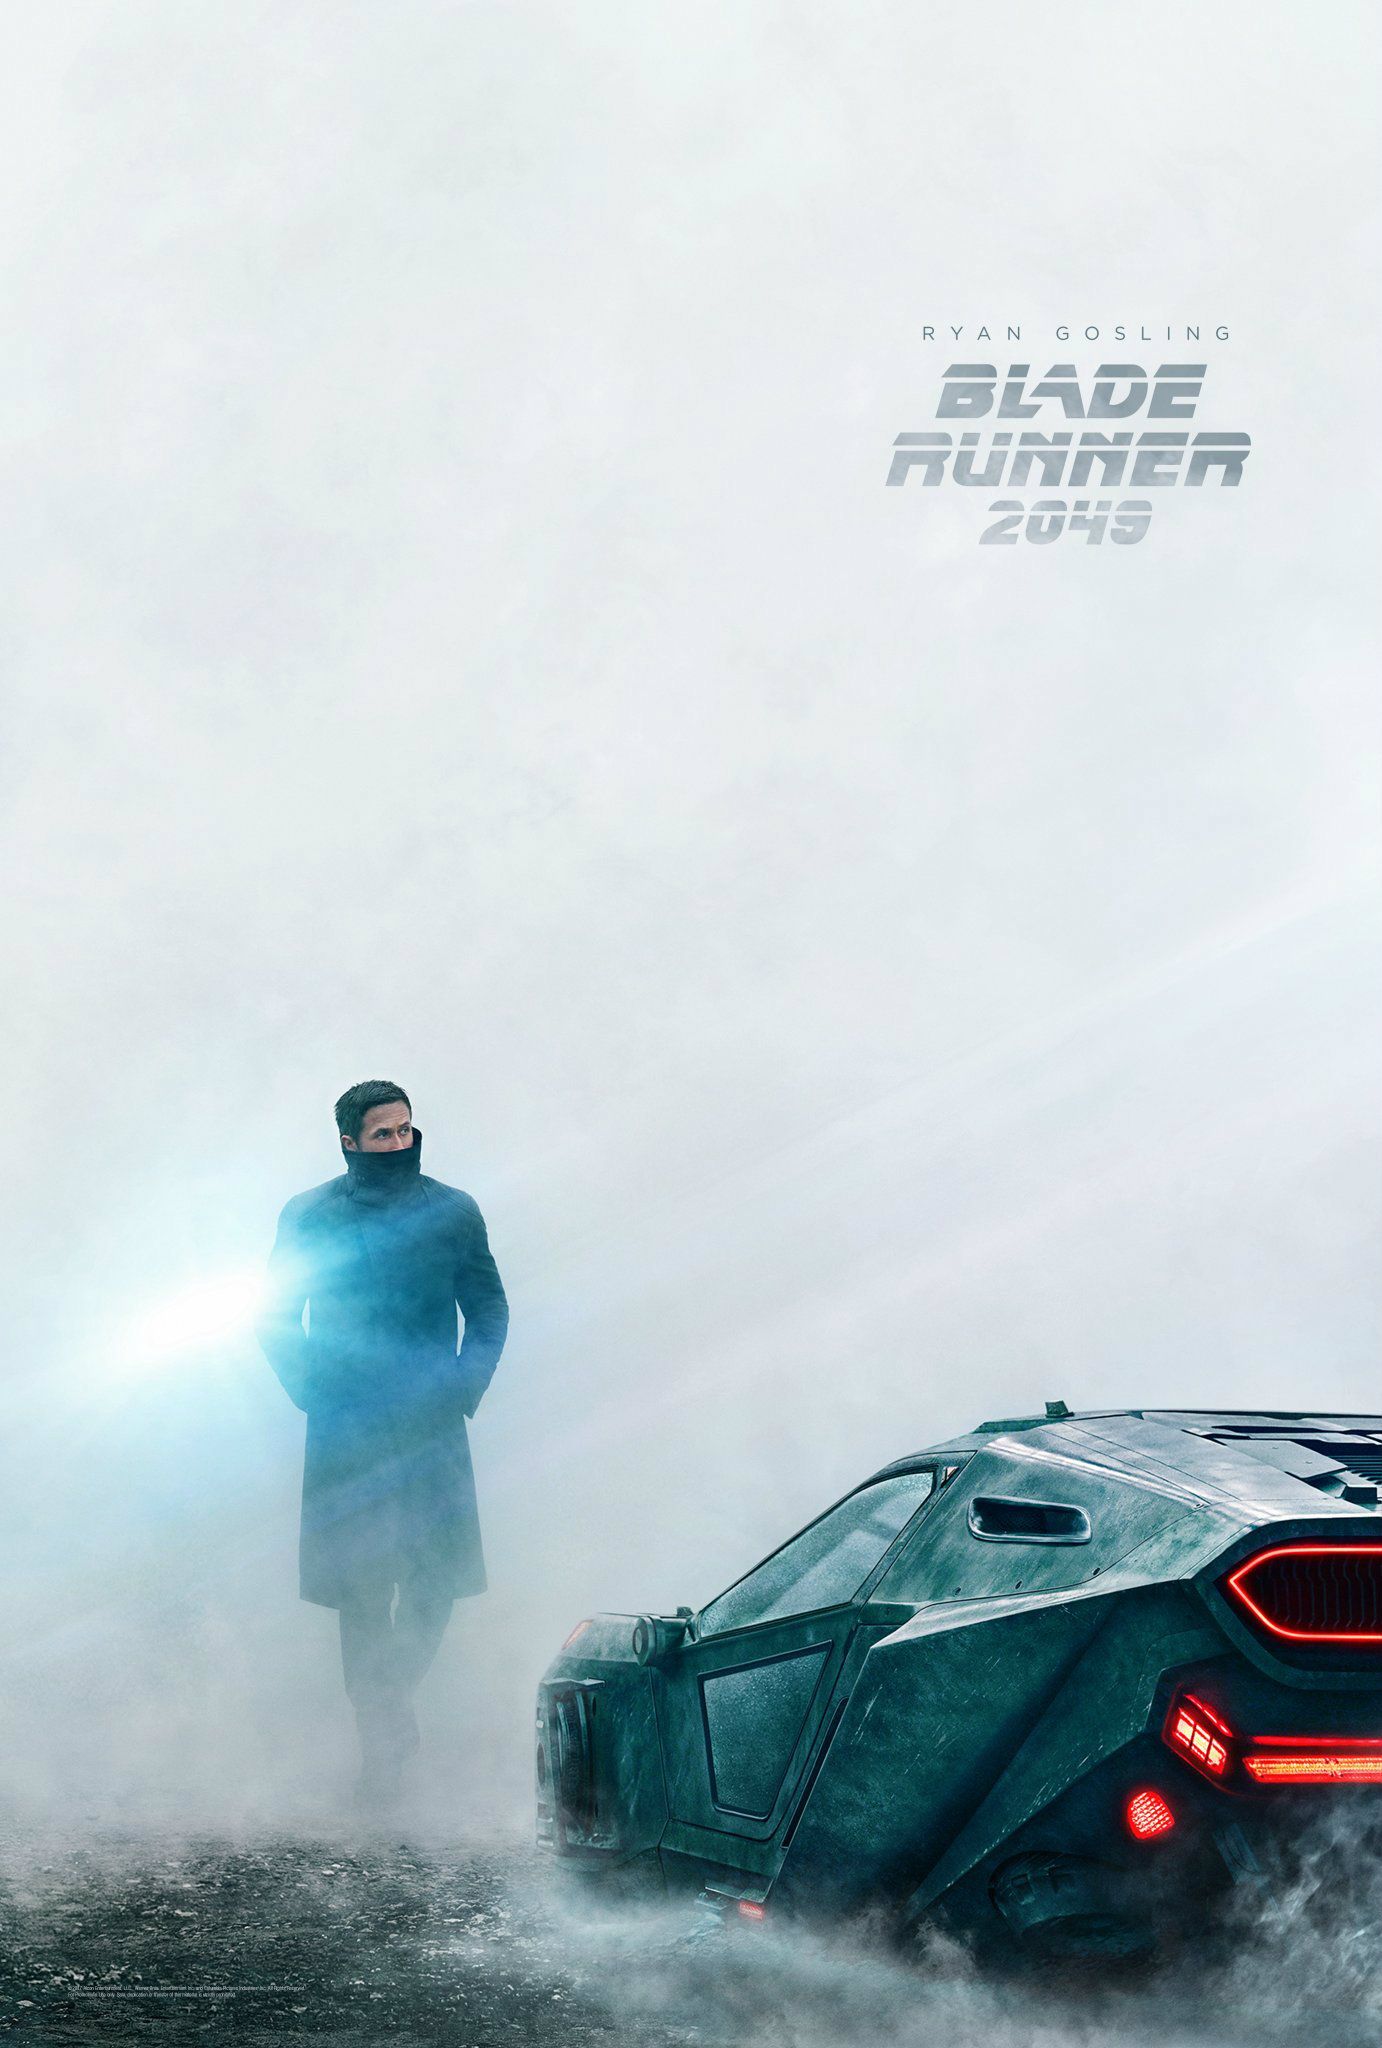 Blade Runner 2049 Early Reactions: This Might Just Be a Masterpiece